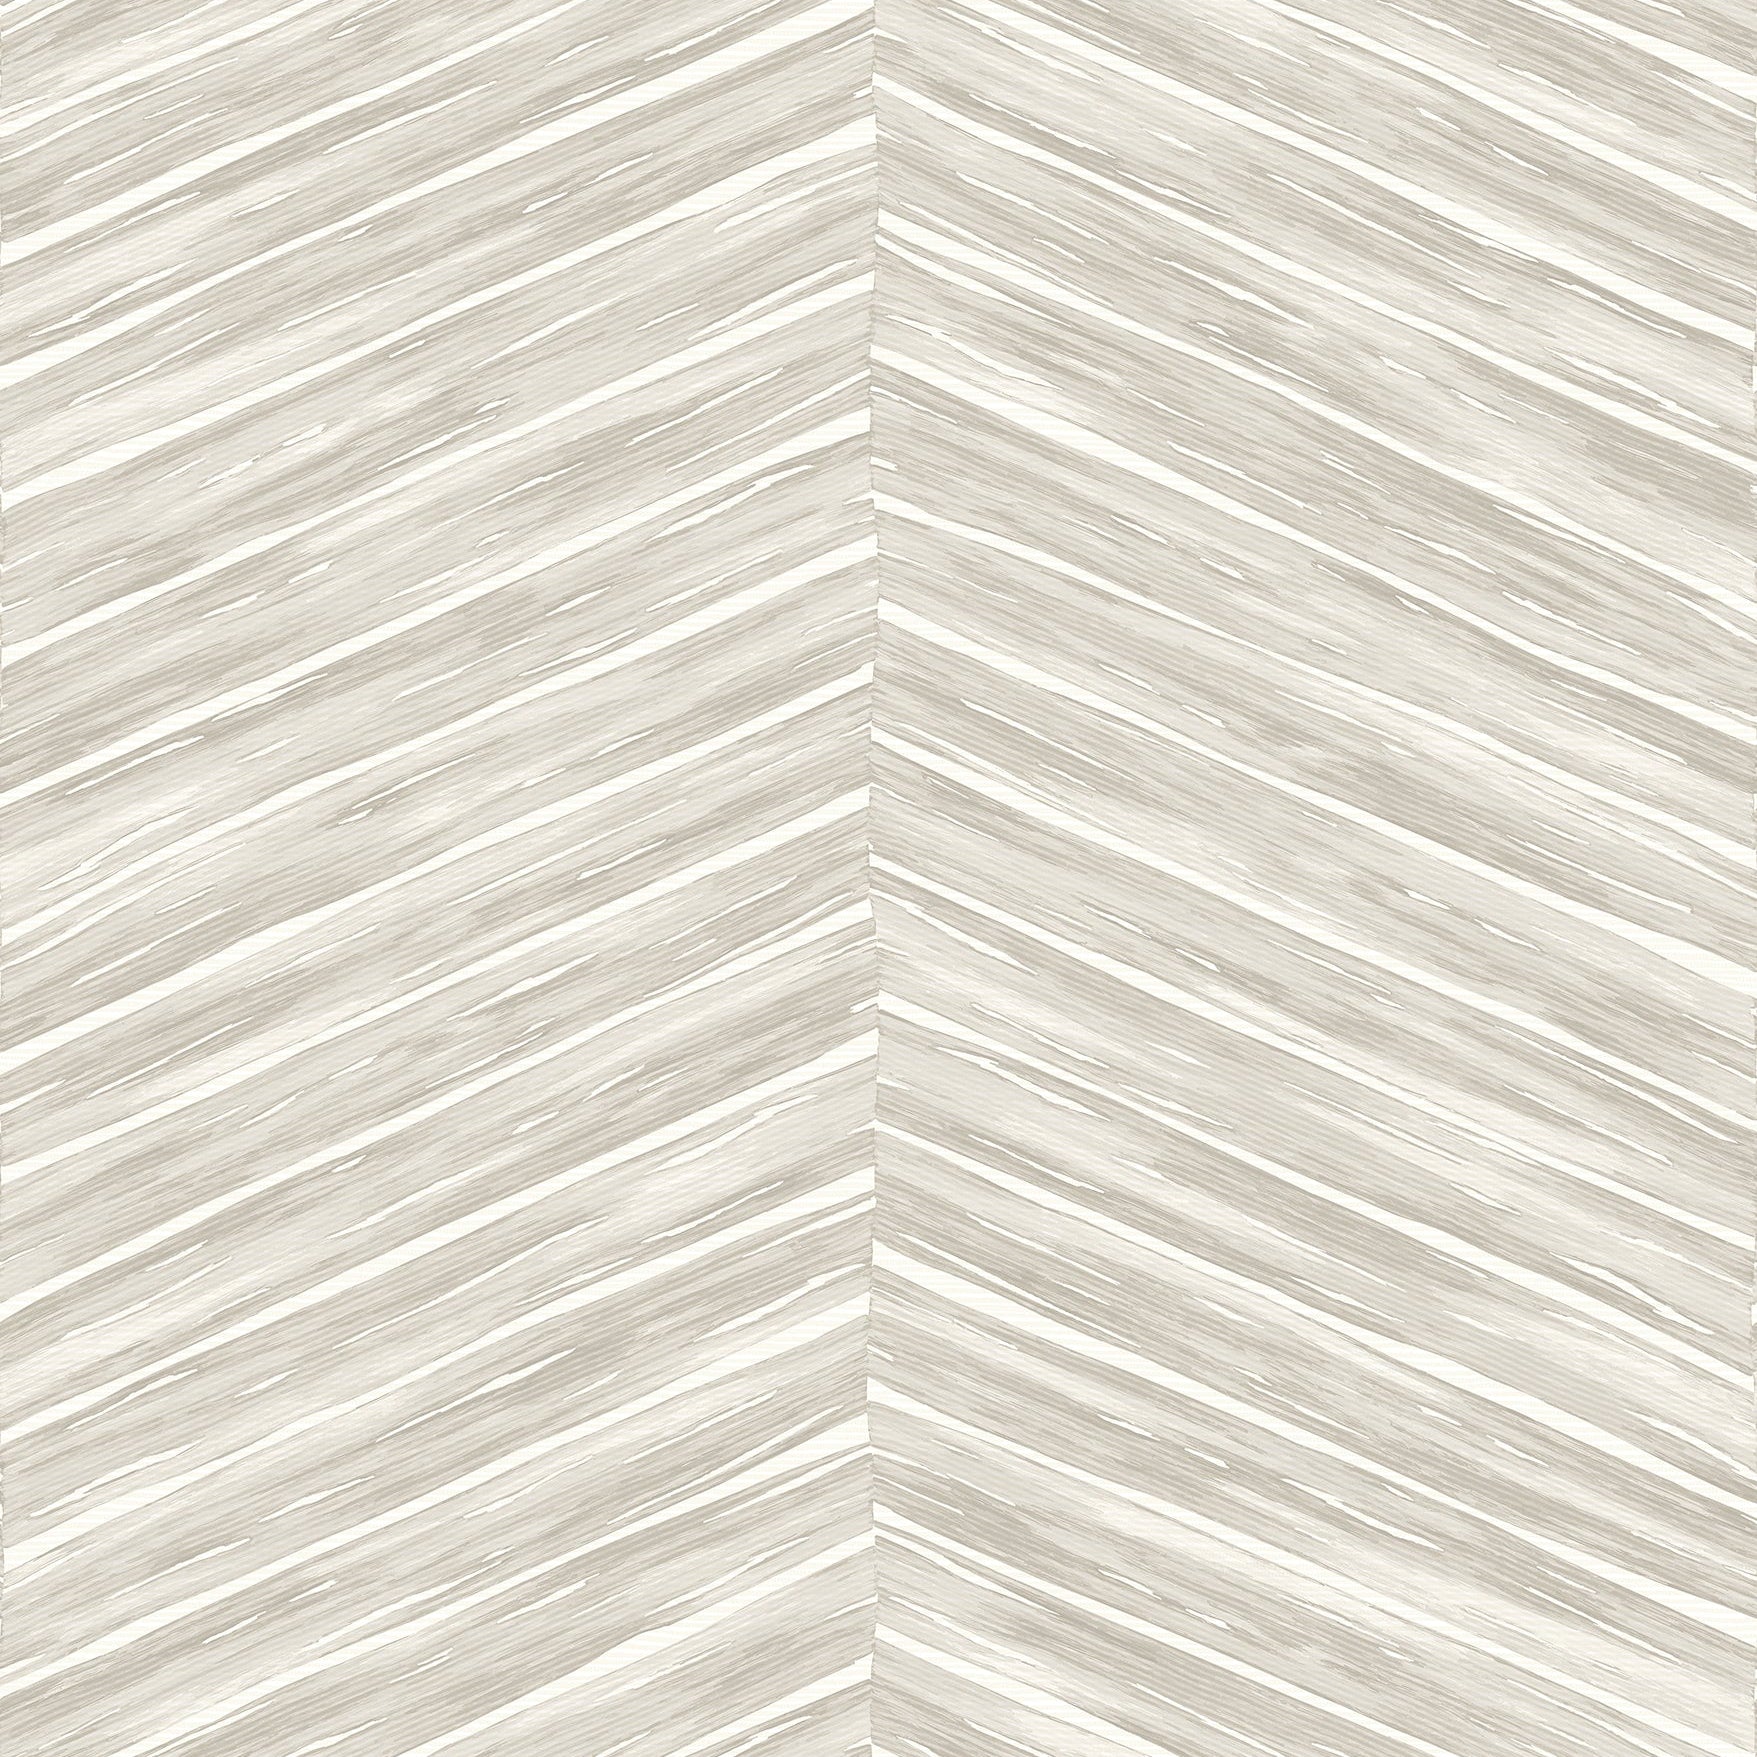 Order 2767-23777 Pina Light Grey Chevron Weave Techniques & Finishes III Brewster